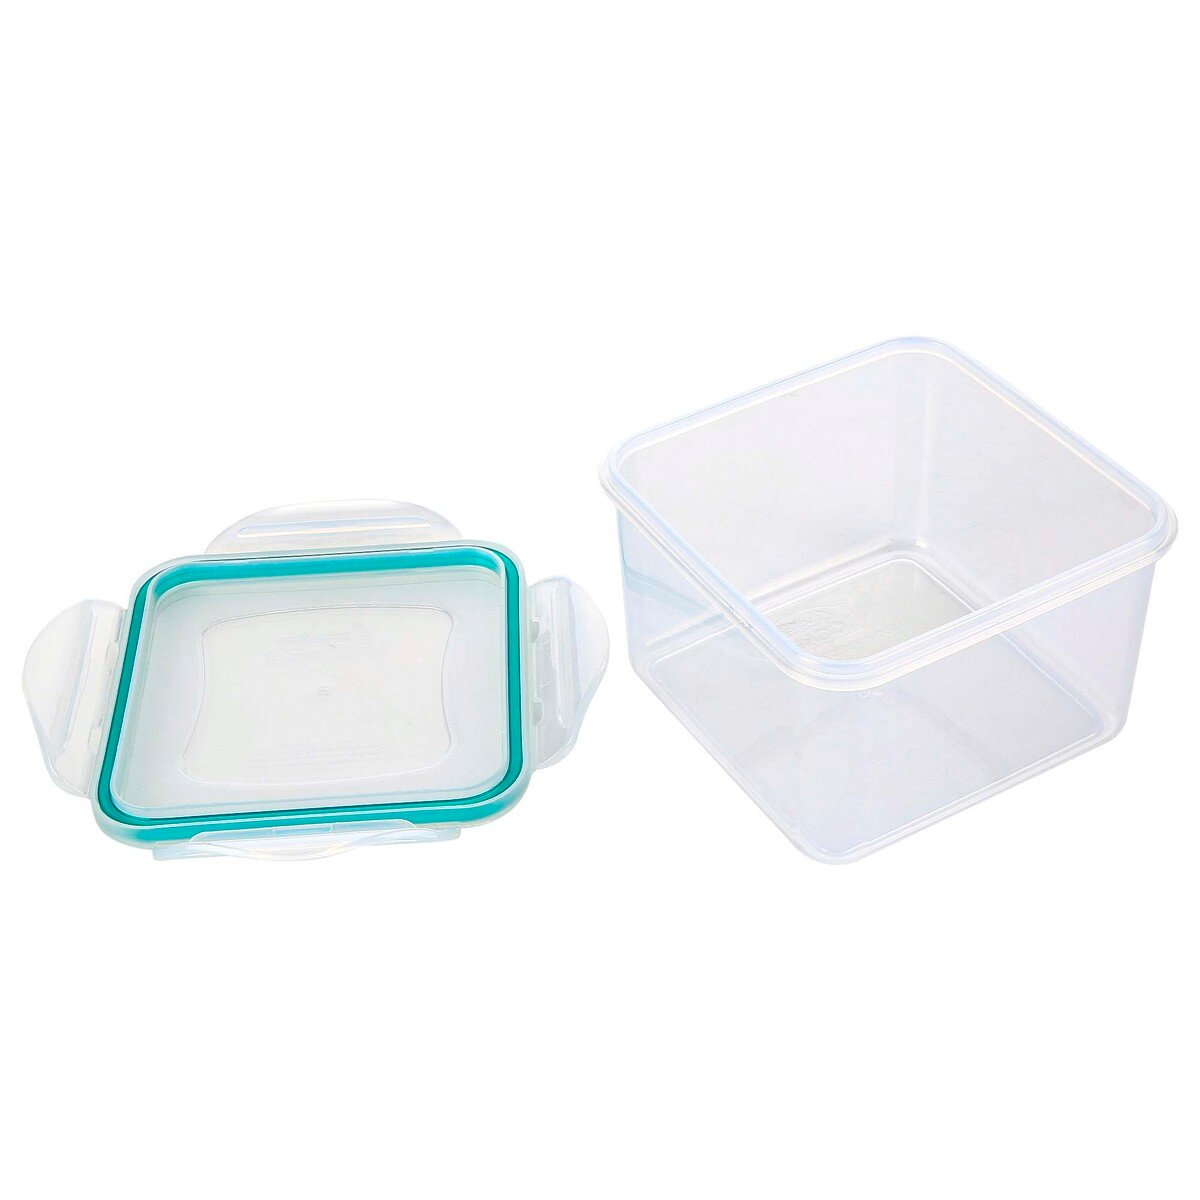 4 Side Locked Container, Transparent, ZP023